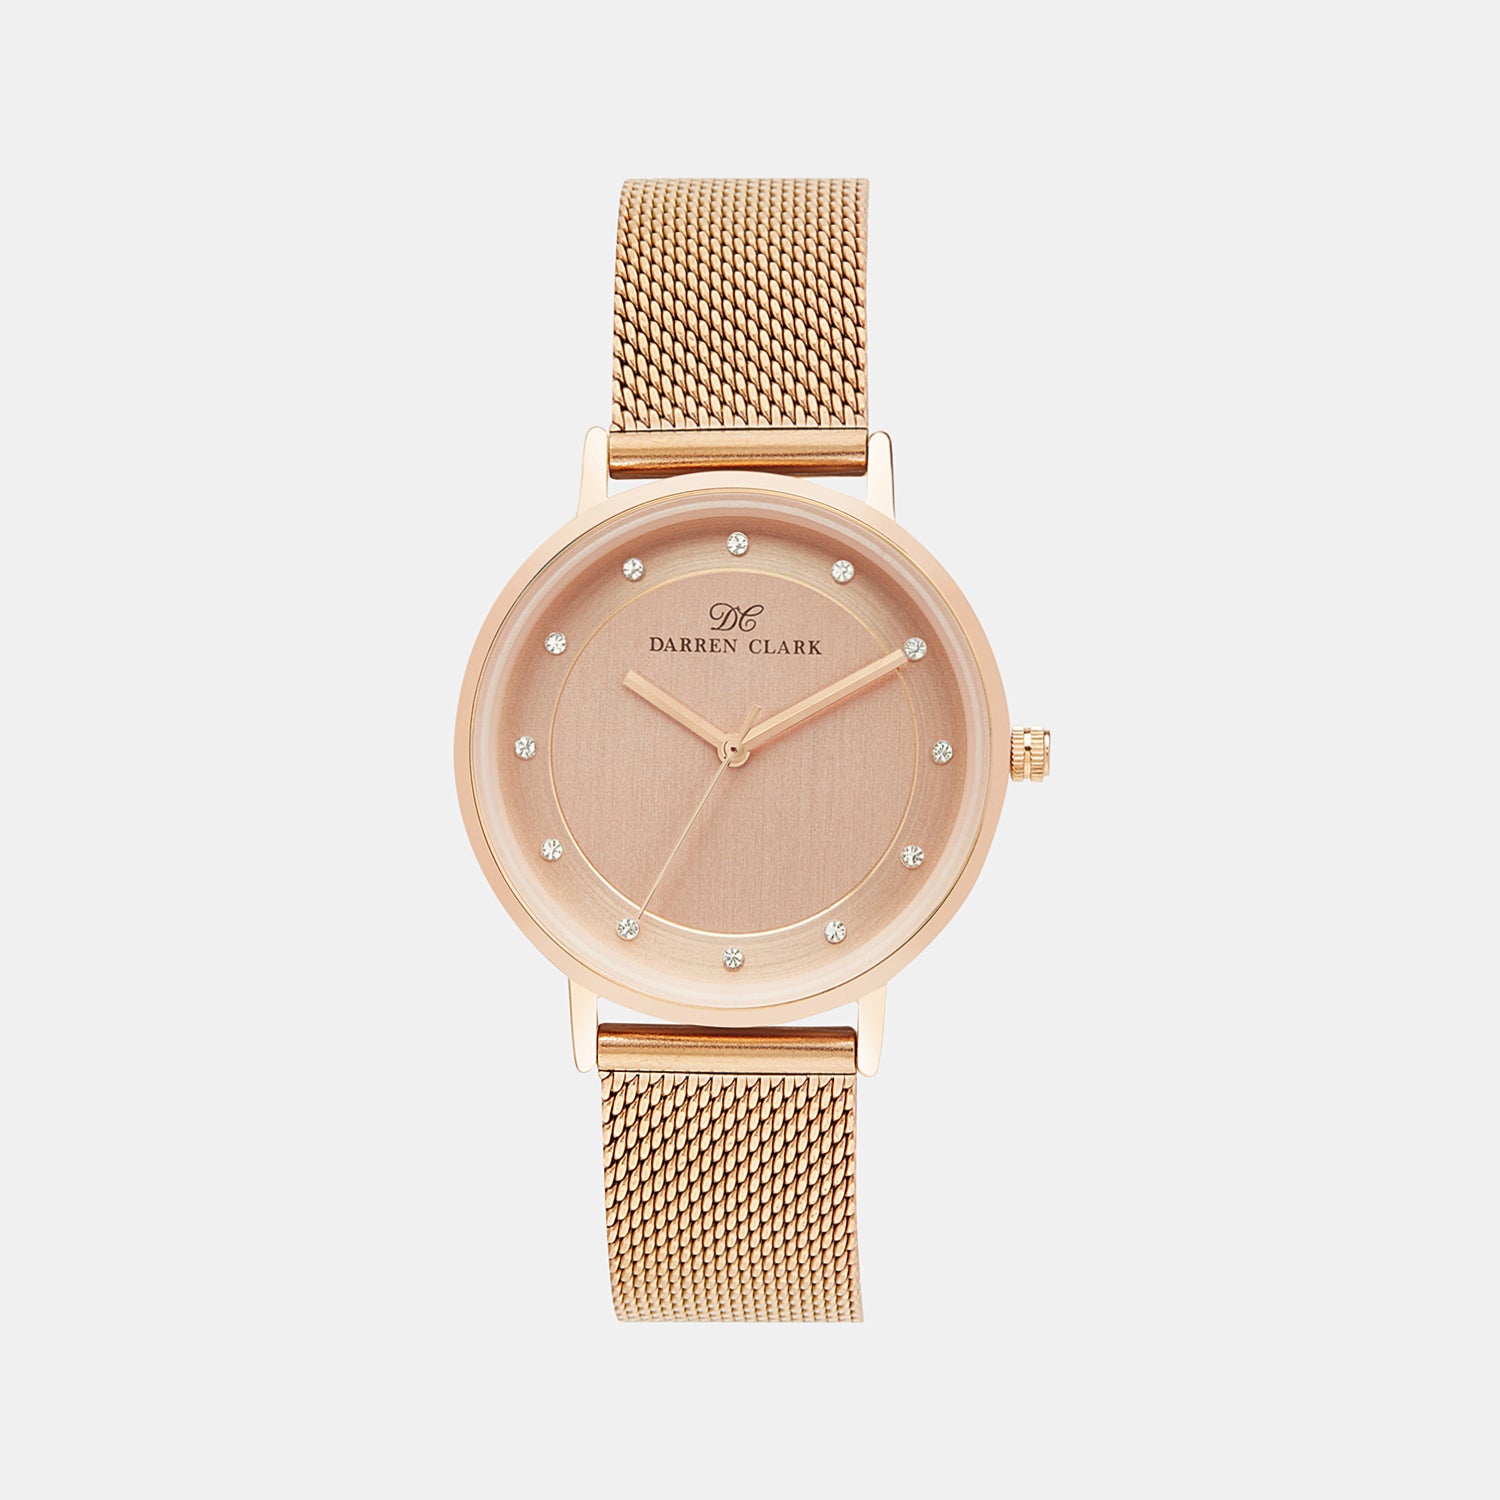 Female Rose Gold Analog Brass Watch 2005C-E0307 – Just In Time